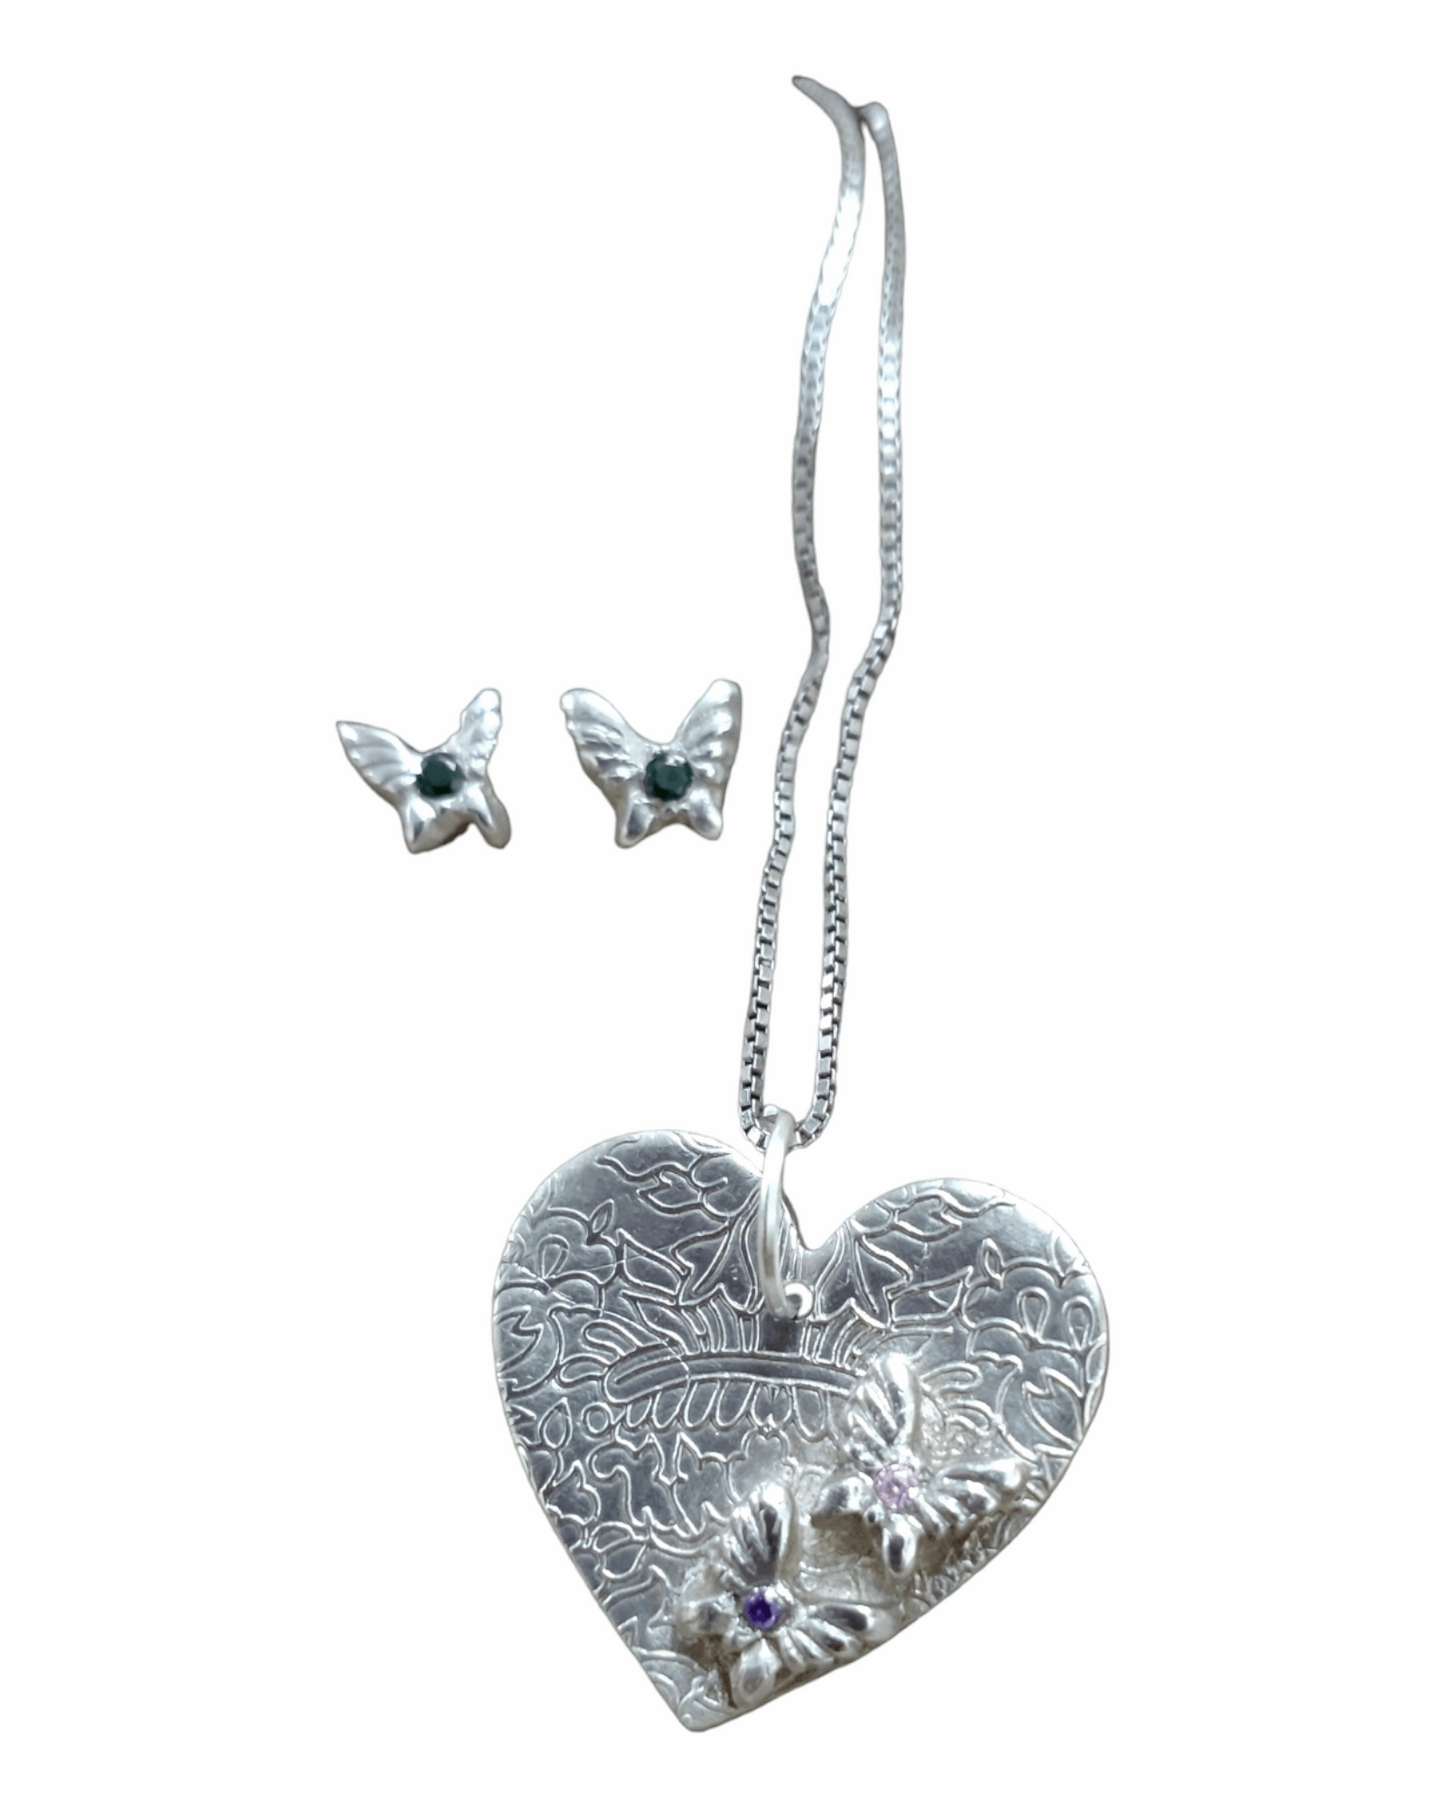 Handmade fine silver embossed pendant and earrings with butterflies set with cubic zirconia stones